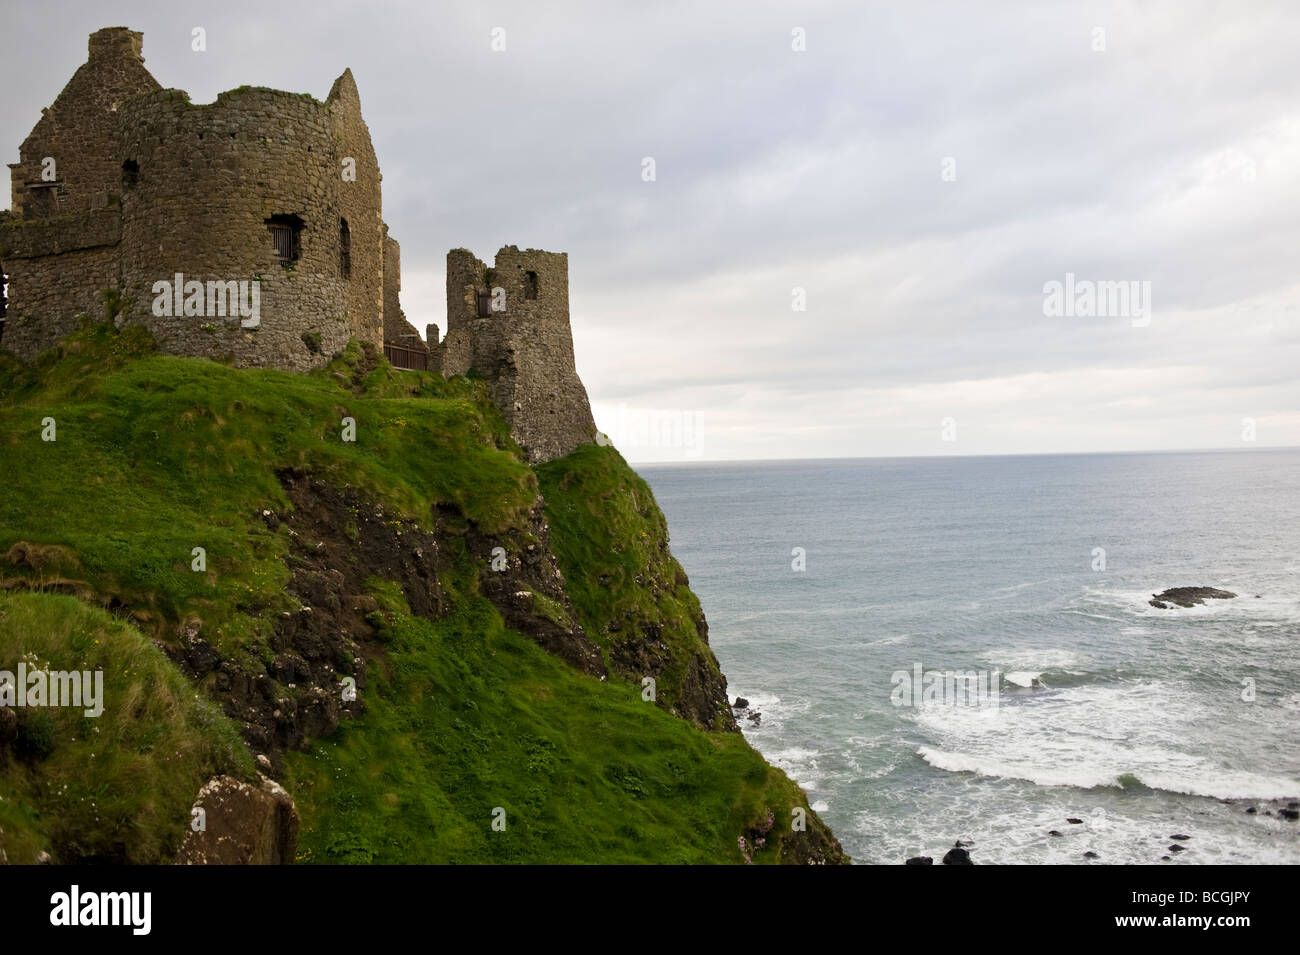 Dunluce castle and cliffs in County Antrim in Northern Ireland Stock Photo